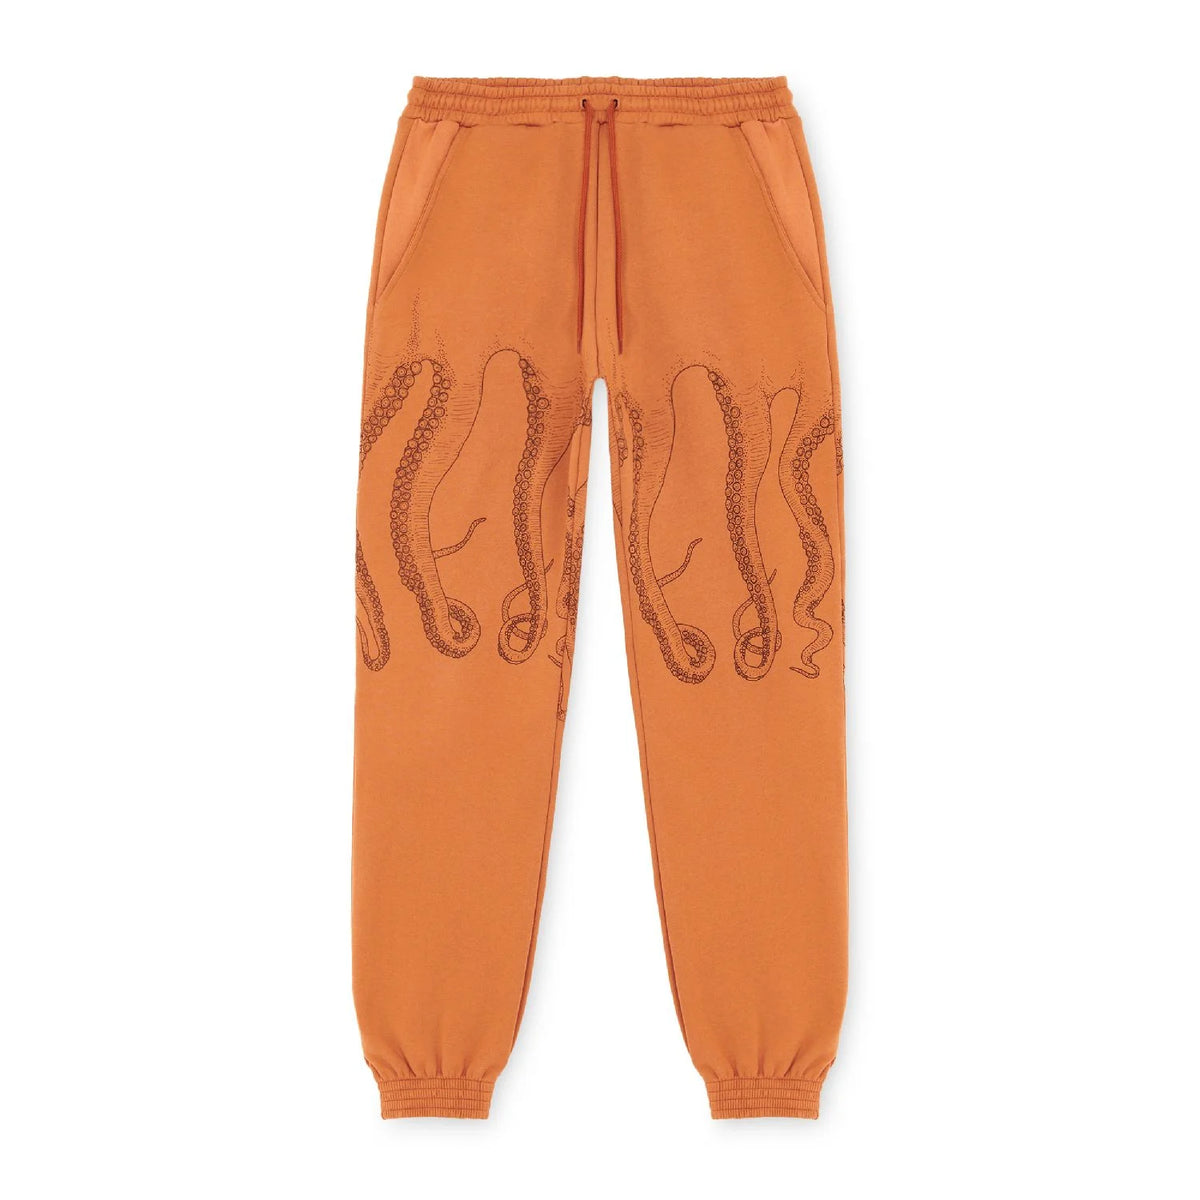 OCTOPUS OUTLINE SWEATPANT 23WOSP03-COK